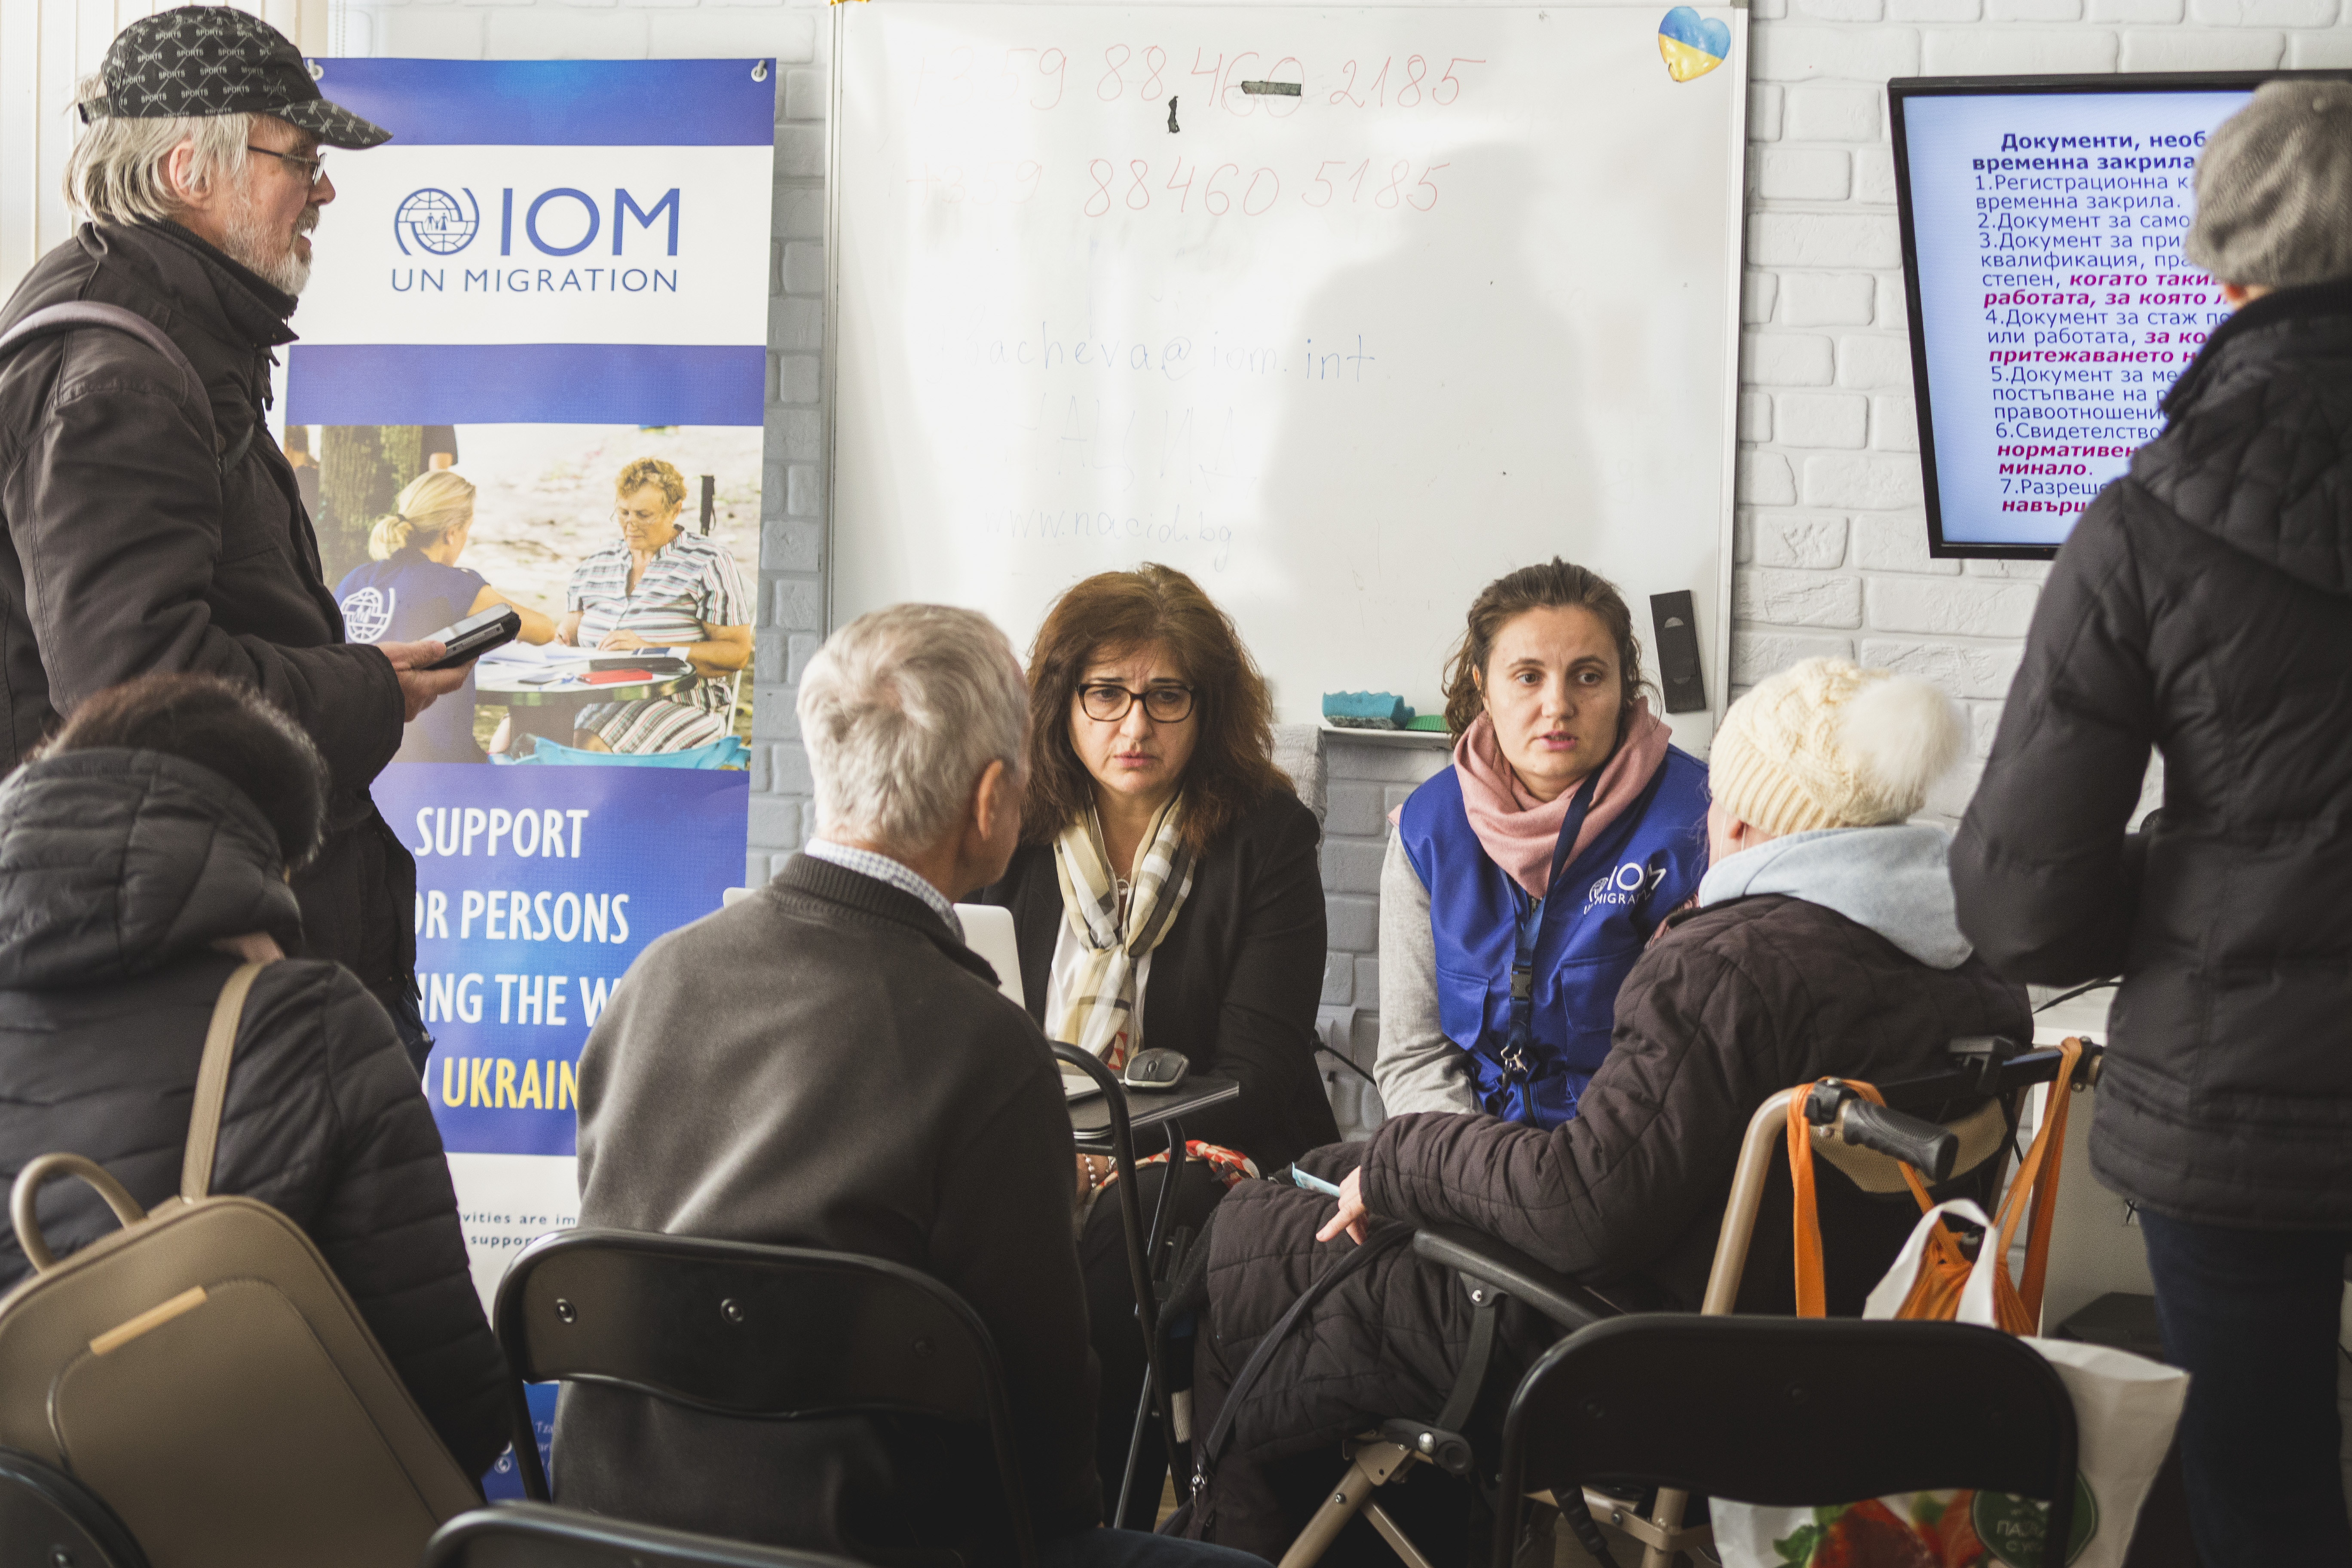 IOM staff talking to a refugee from Ukraine with disabilities